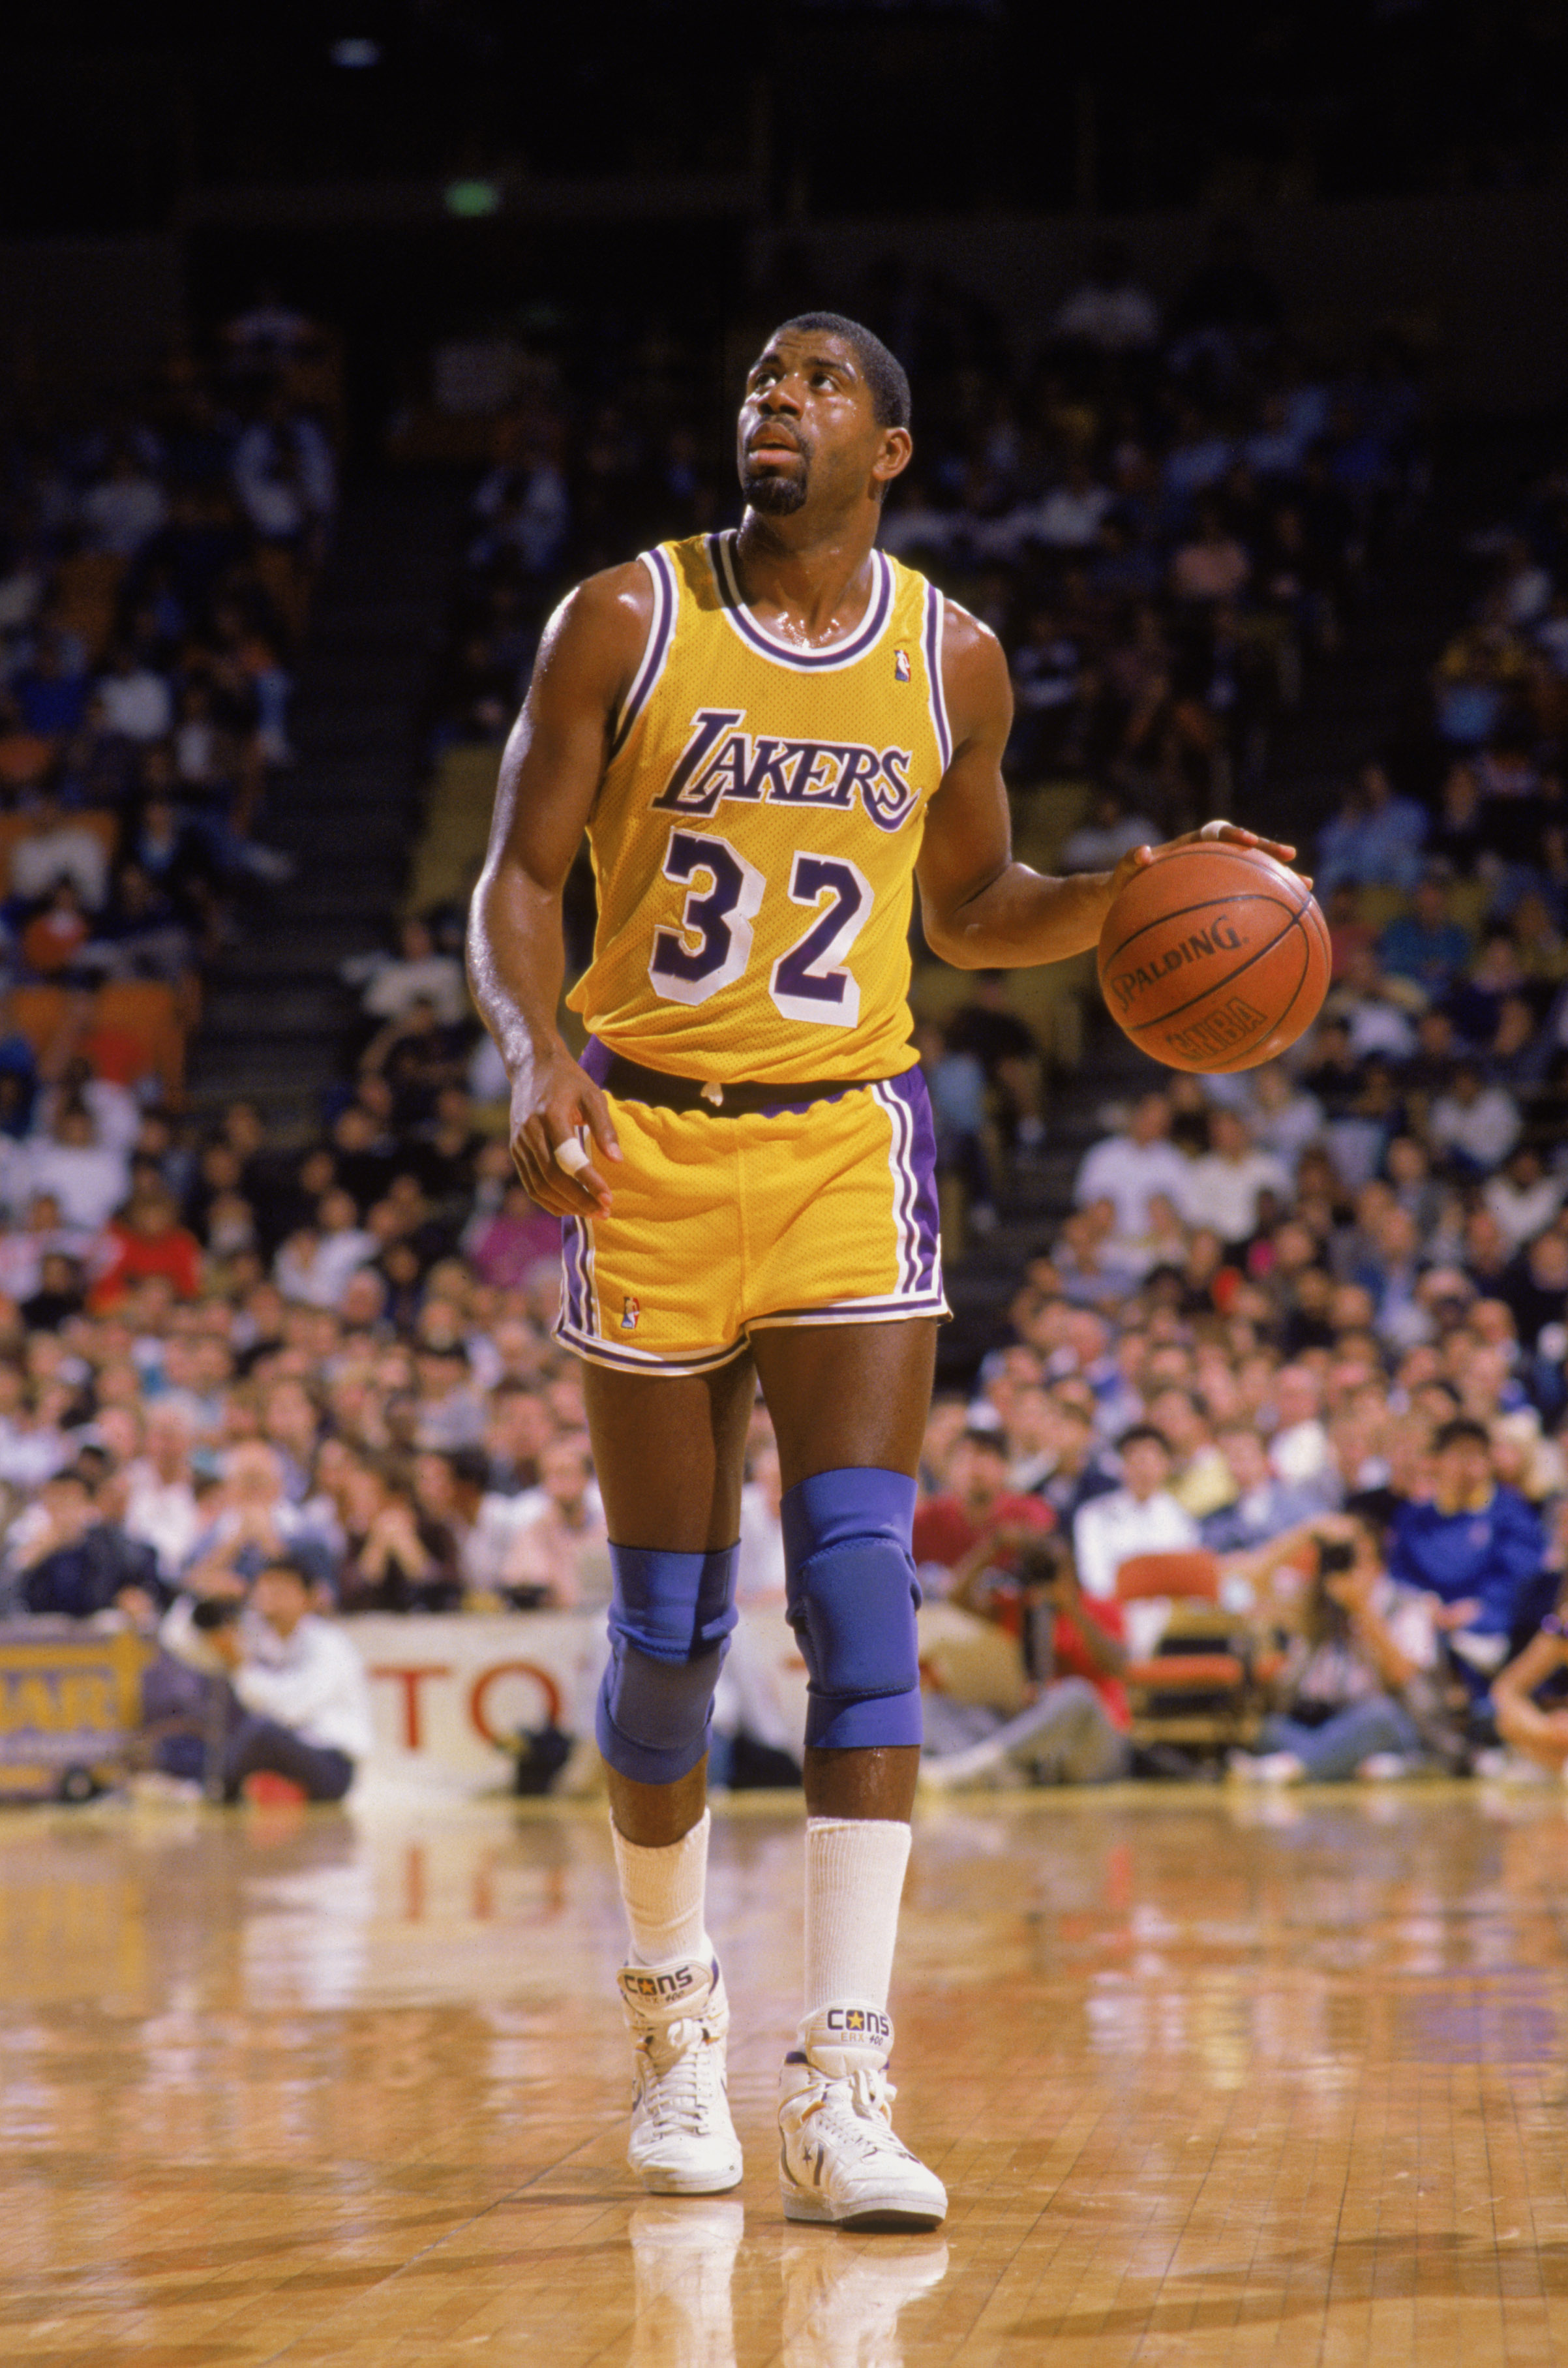 LOS ANGELES - 1988:  Magic Johnson #32 of the Los Angeles Lakers dribbles the ball during an NBA game at the Great Western Forum in Los Angeles, California in 1988. (Photo by: Mike Powell/Getty Images)